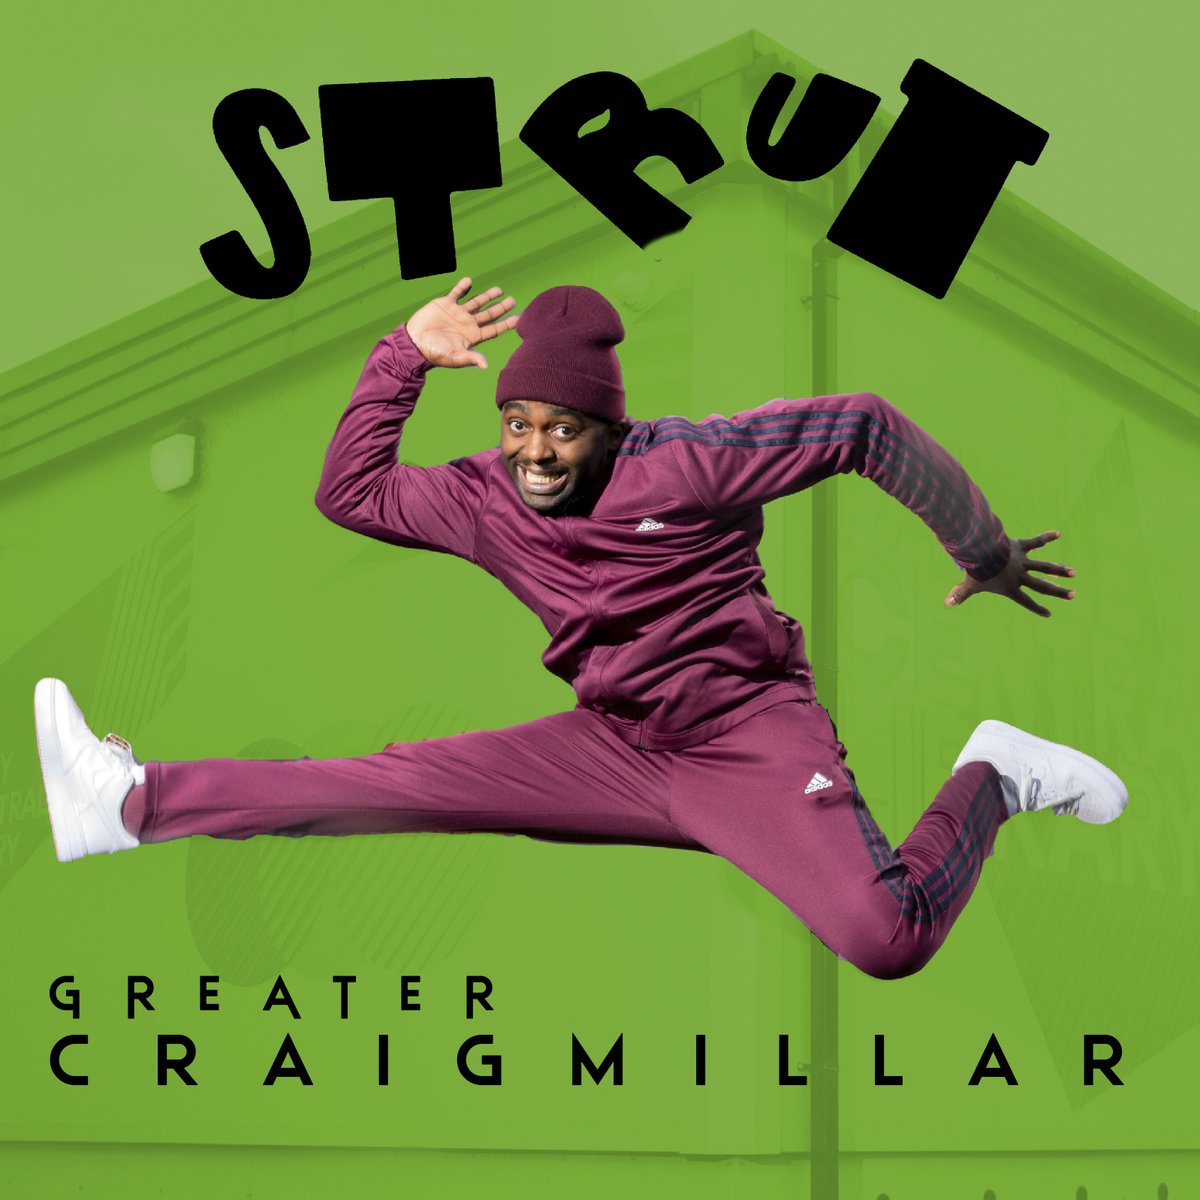 Community dancers wanted! Do you live in or have a connection to Greater Craigmillar? Do you love to boogie or know someone who does? We're looking for 5 dancers for STRUT - an outdoor dance parade. Find out how to audition for this paid opportunity: m-hz.co.uk/strut-craigmil…